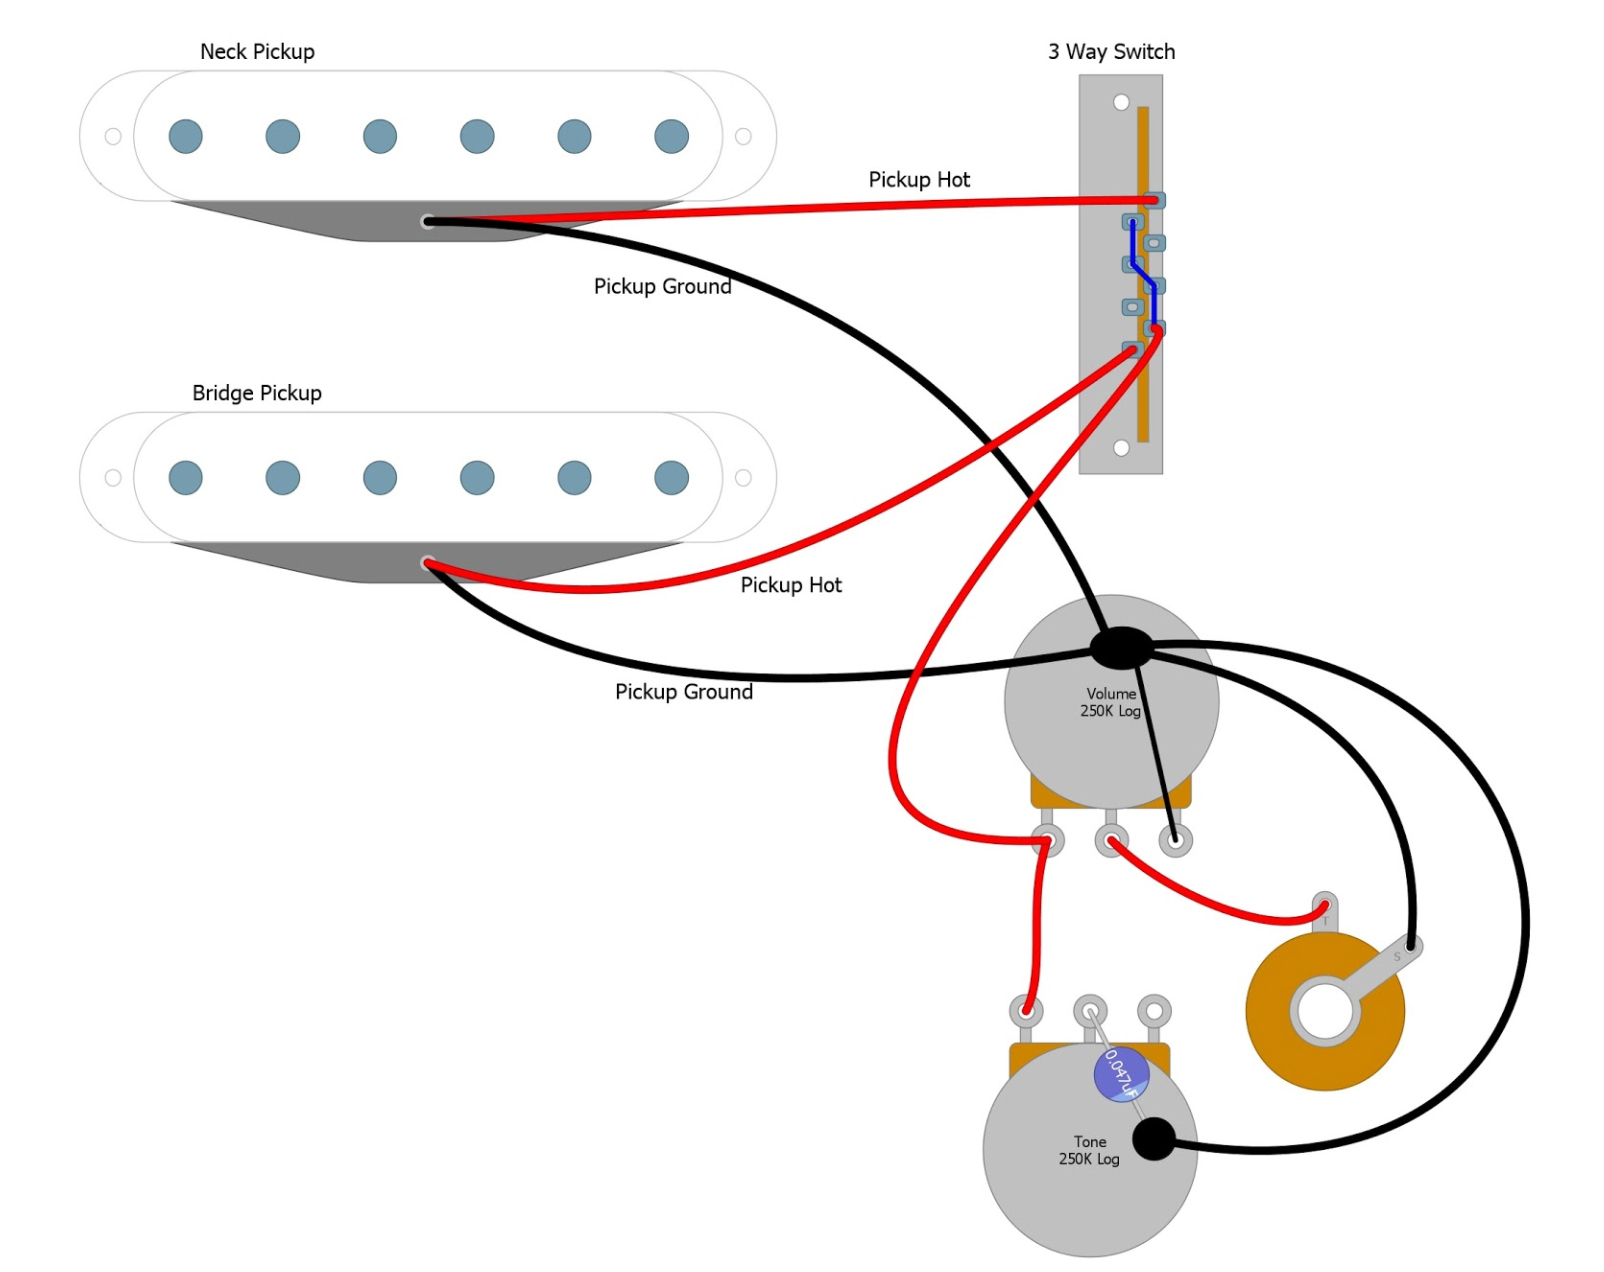 Telecaster Humbuckerin Neck 4 Way Switch Wiring Diagram from humbuckersoup.com